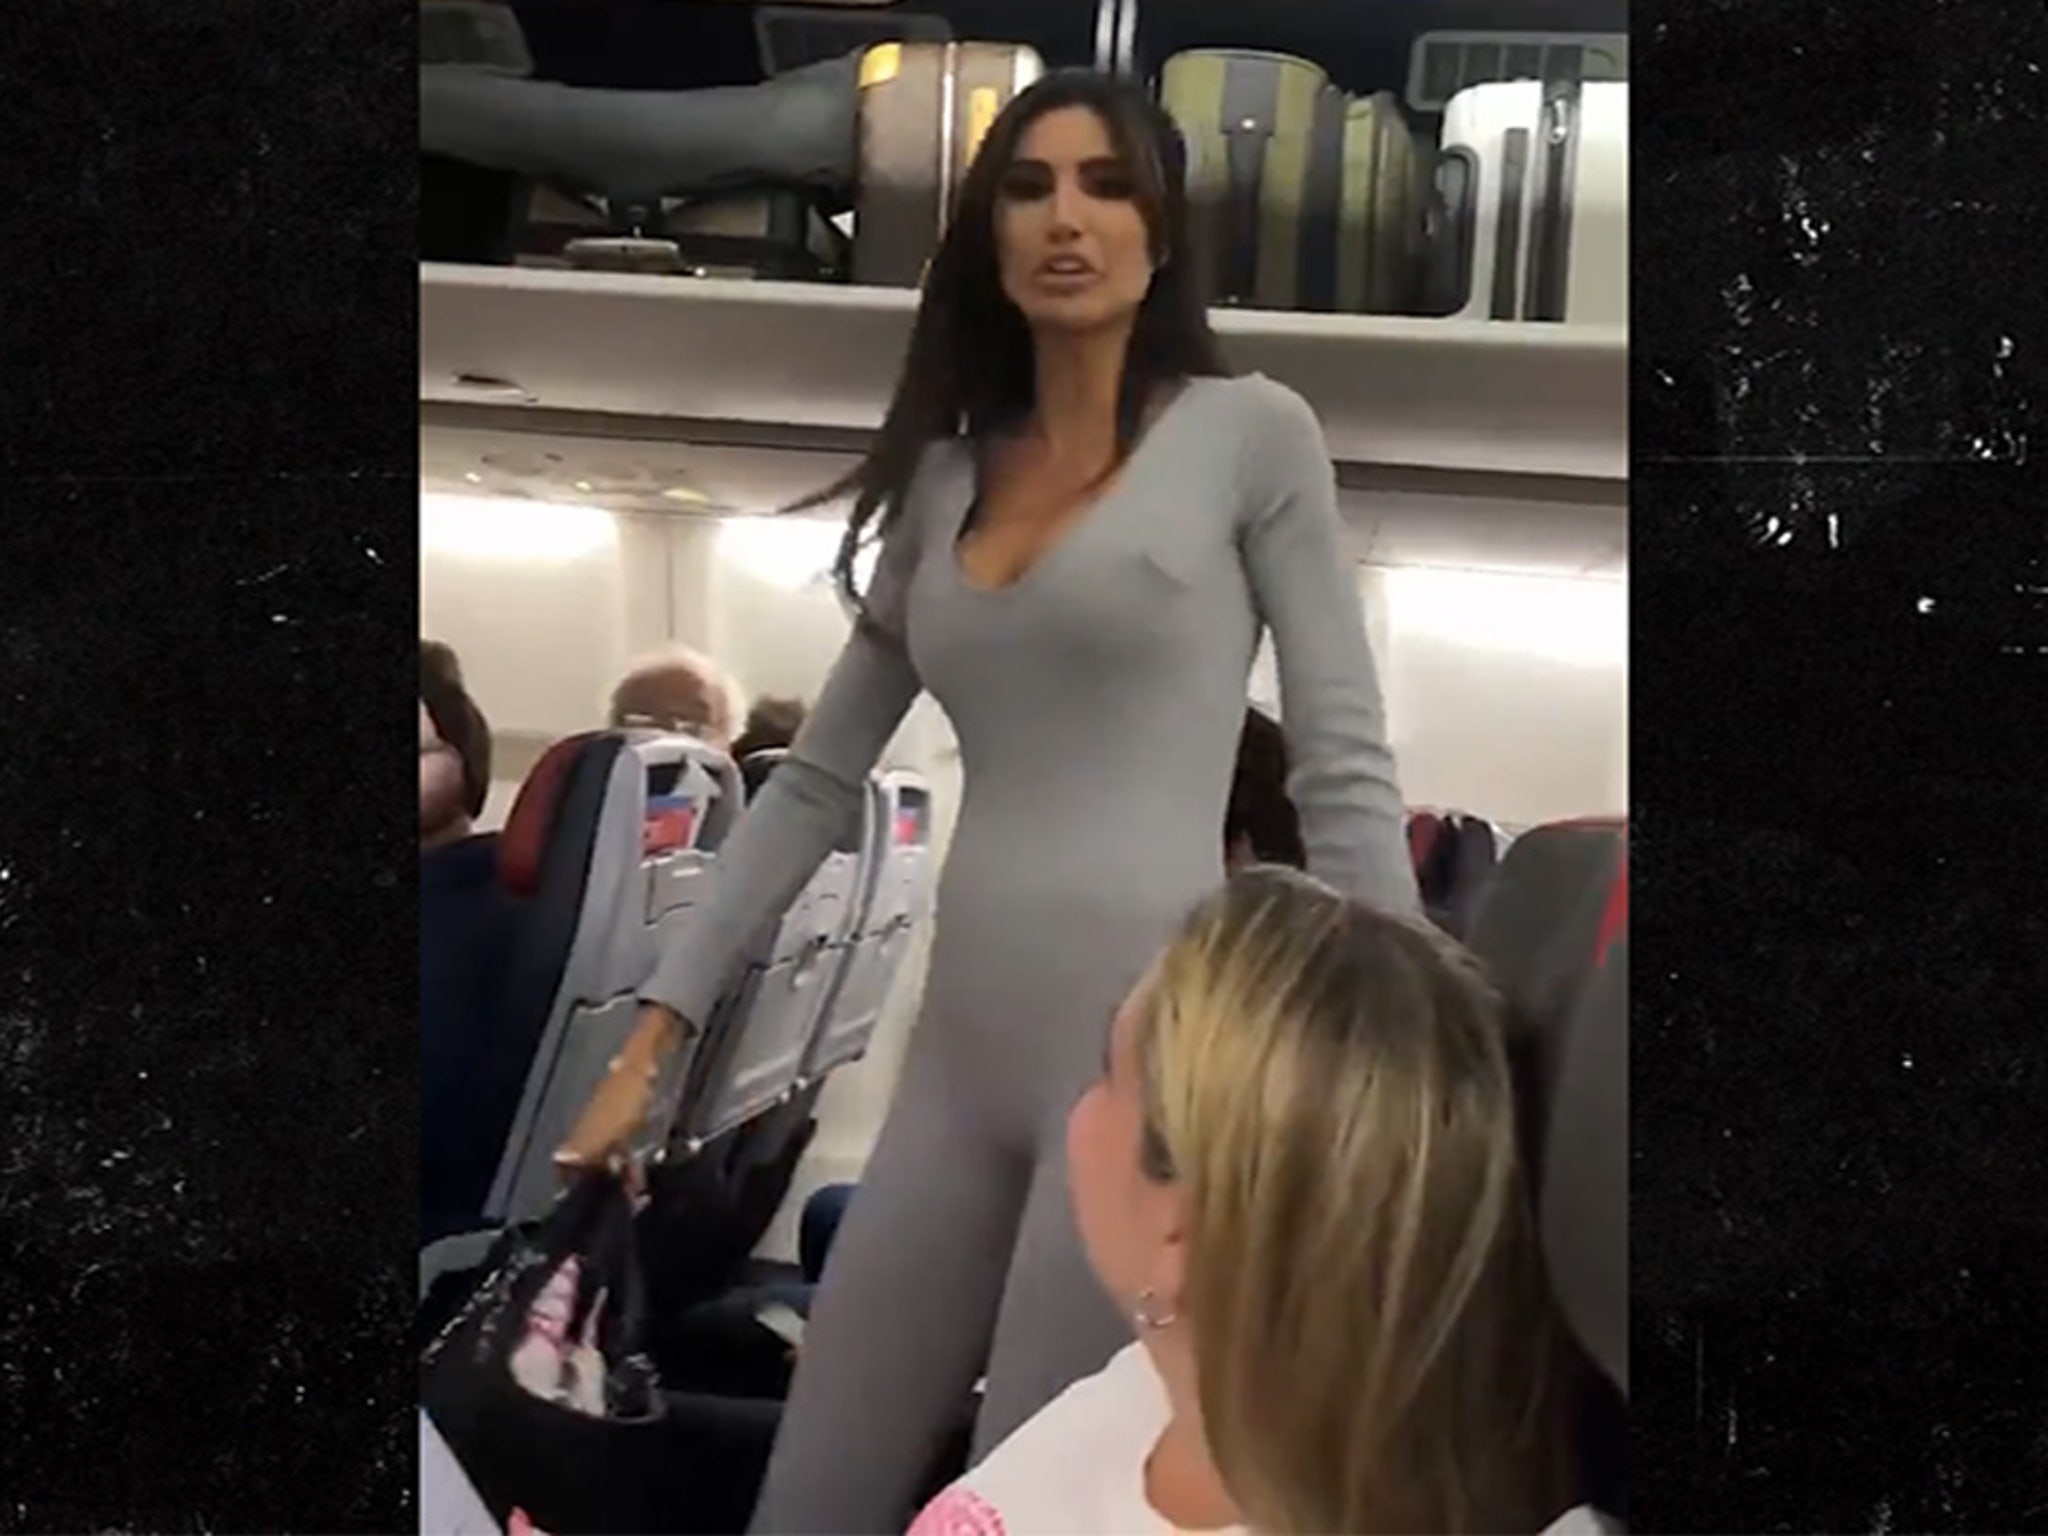 IG Famous Woman In Viral Plane Video Says She Left Flight On Her Own Terms photo